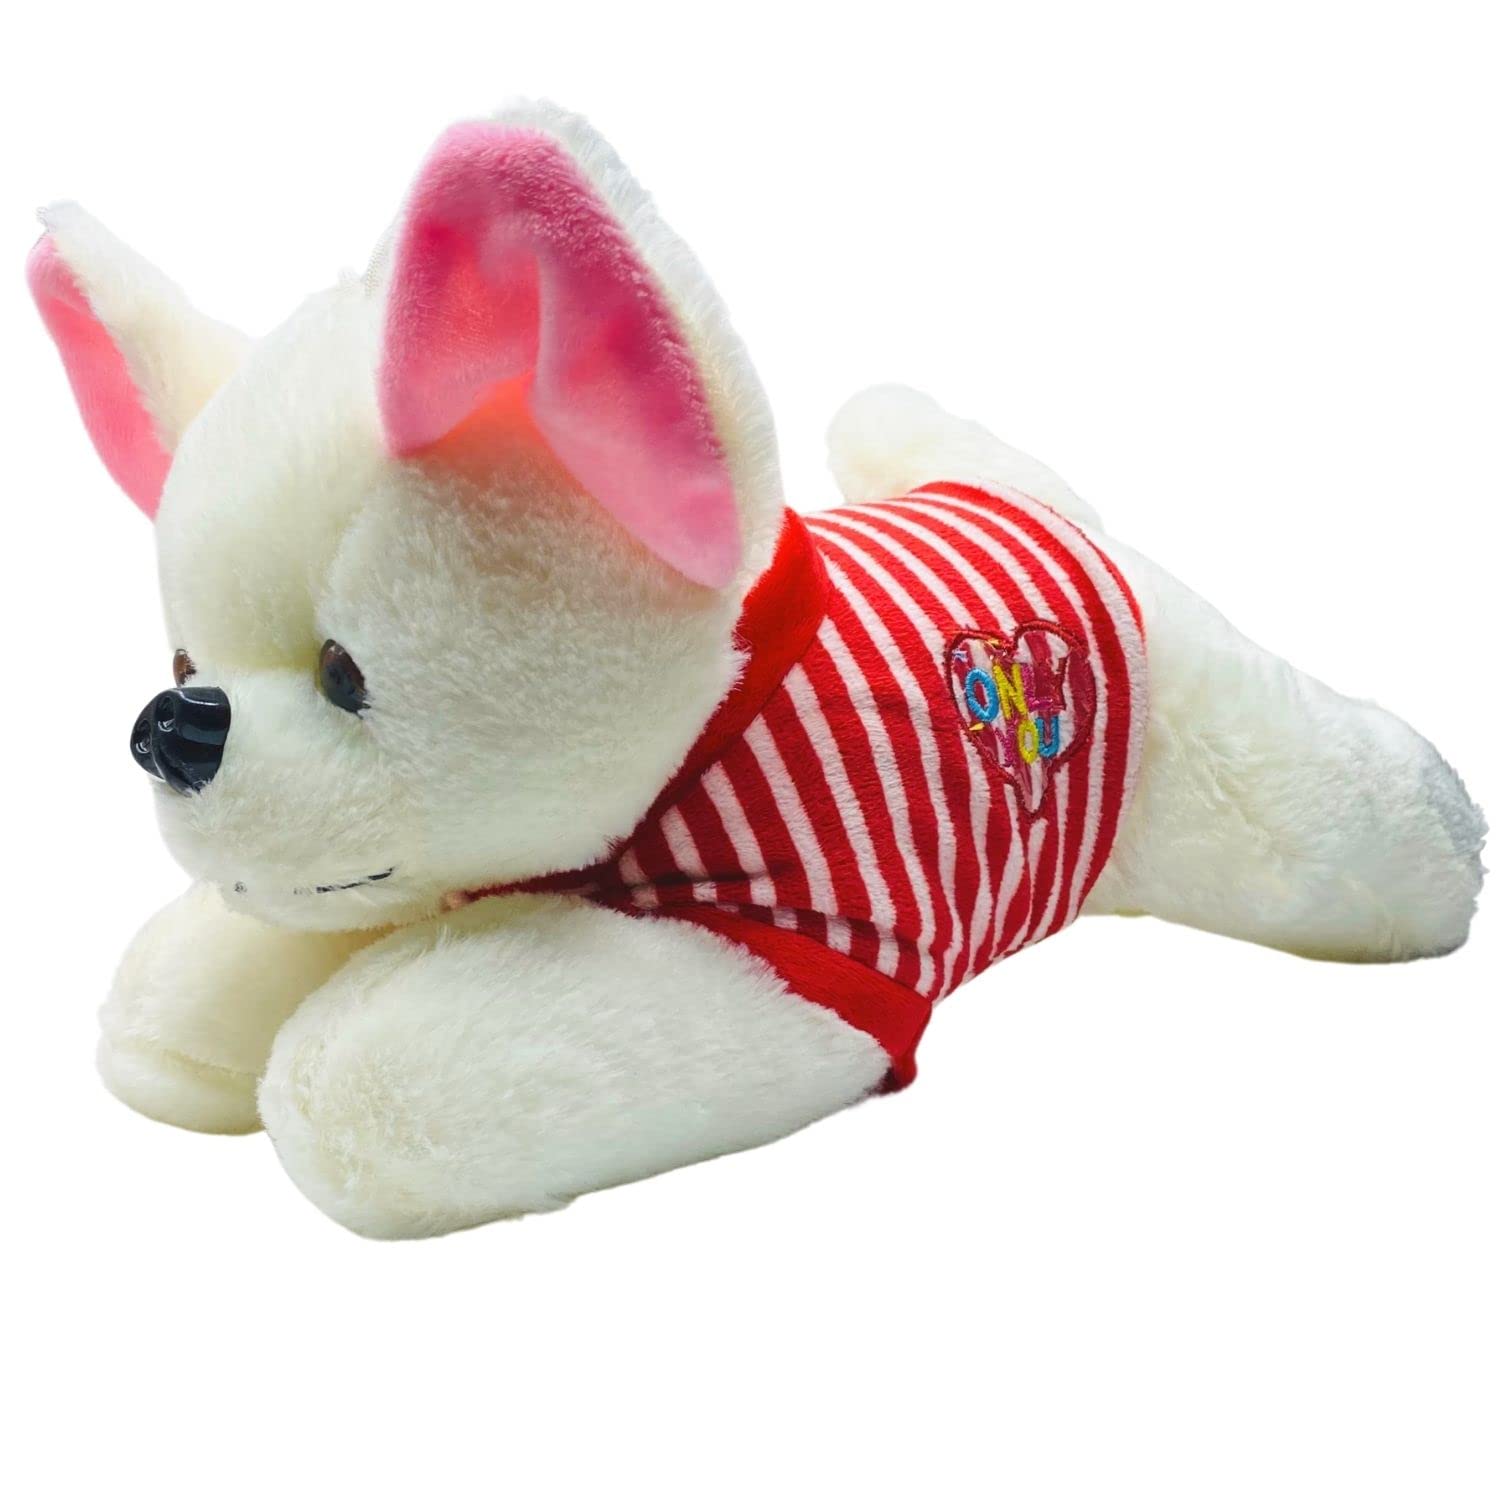 Kids Mandi soft toys for sale, colorful and playful.